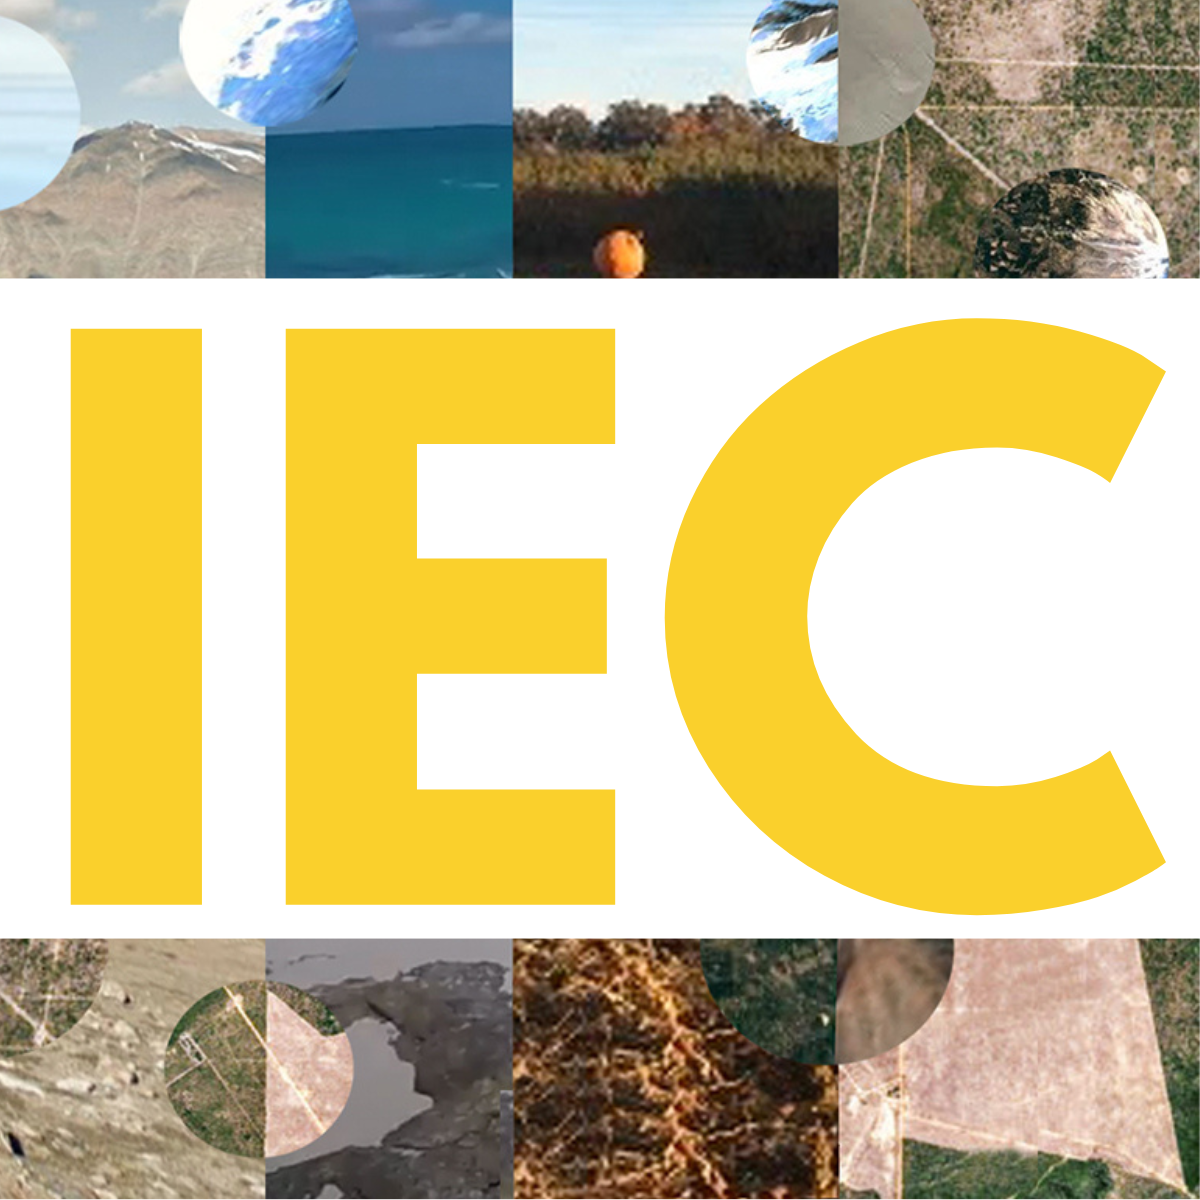 IEC yellow letters overlaid on a photo collage.